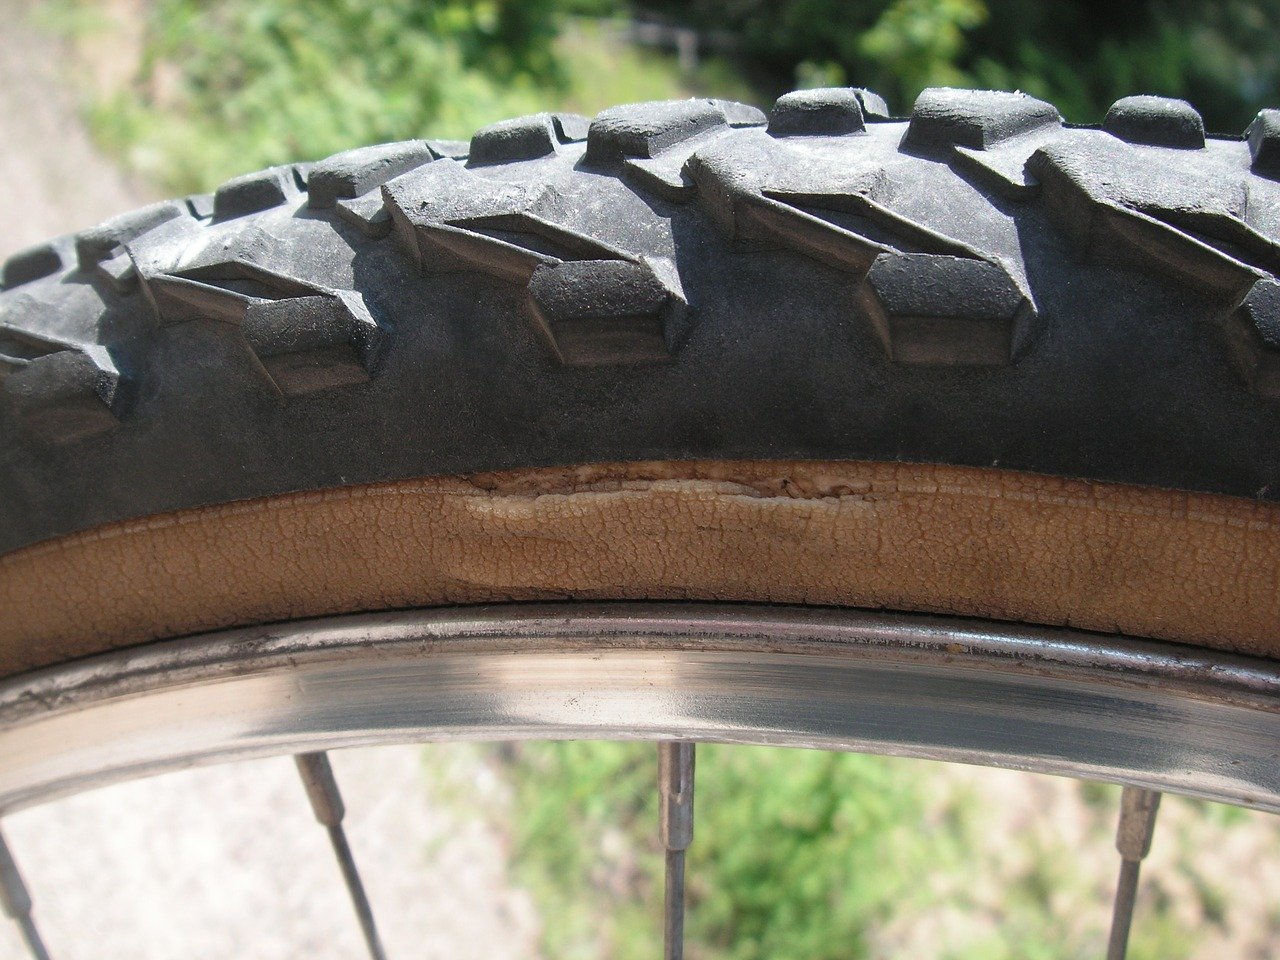 How to fix an electric bike tire puncture